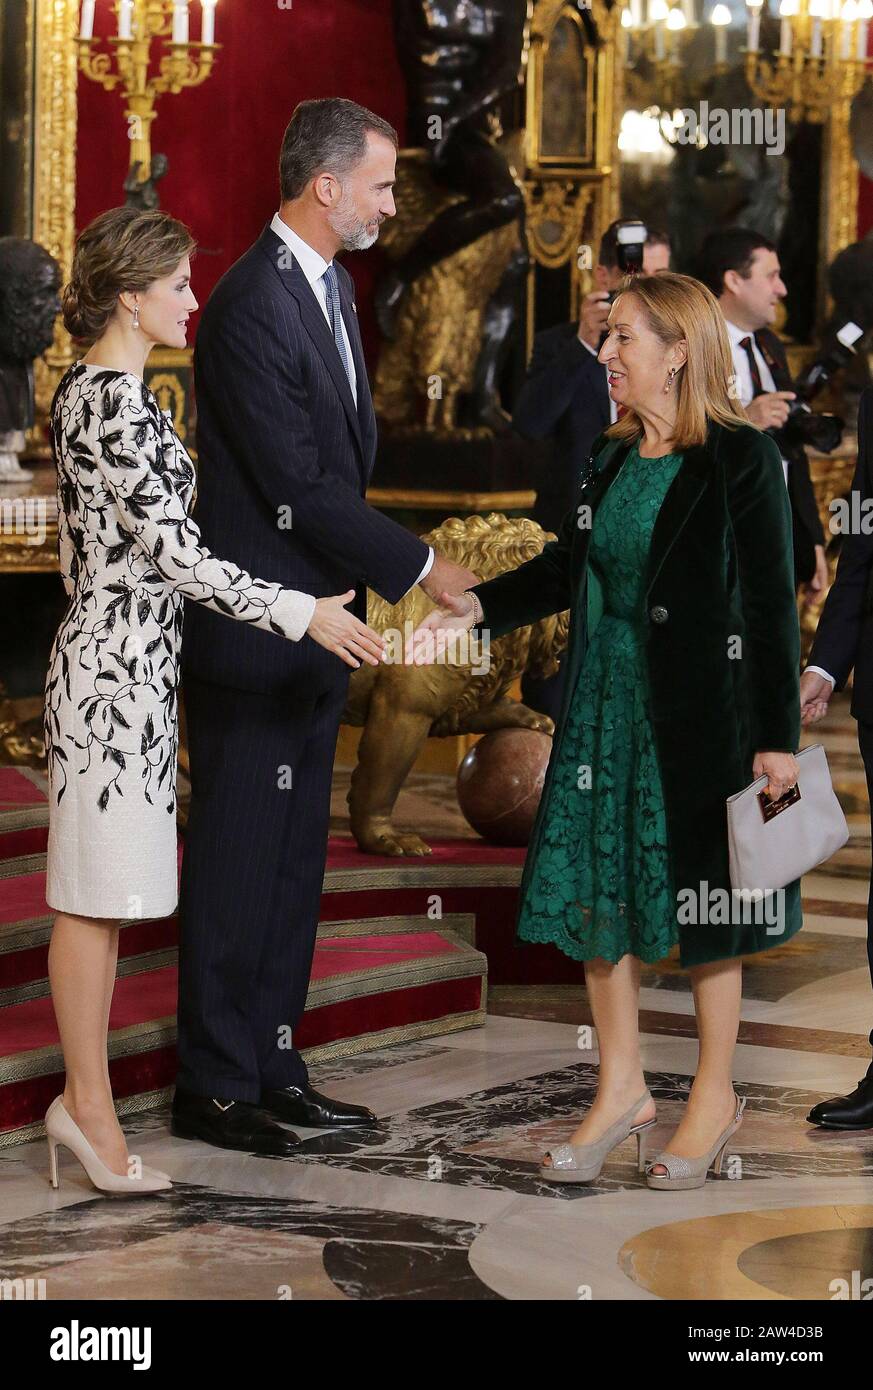 King Felipe VI of Spain (c), Queen Letizia of Spain (l) and Ana Pastor, President of Congress of Deputies of Spain during the National Day acts. Octob Stock Photo